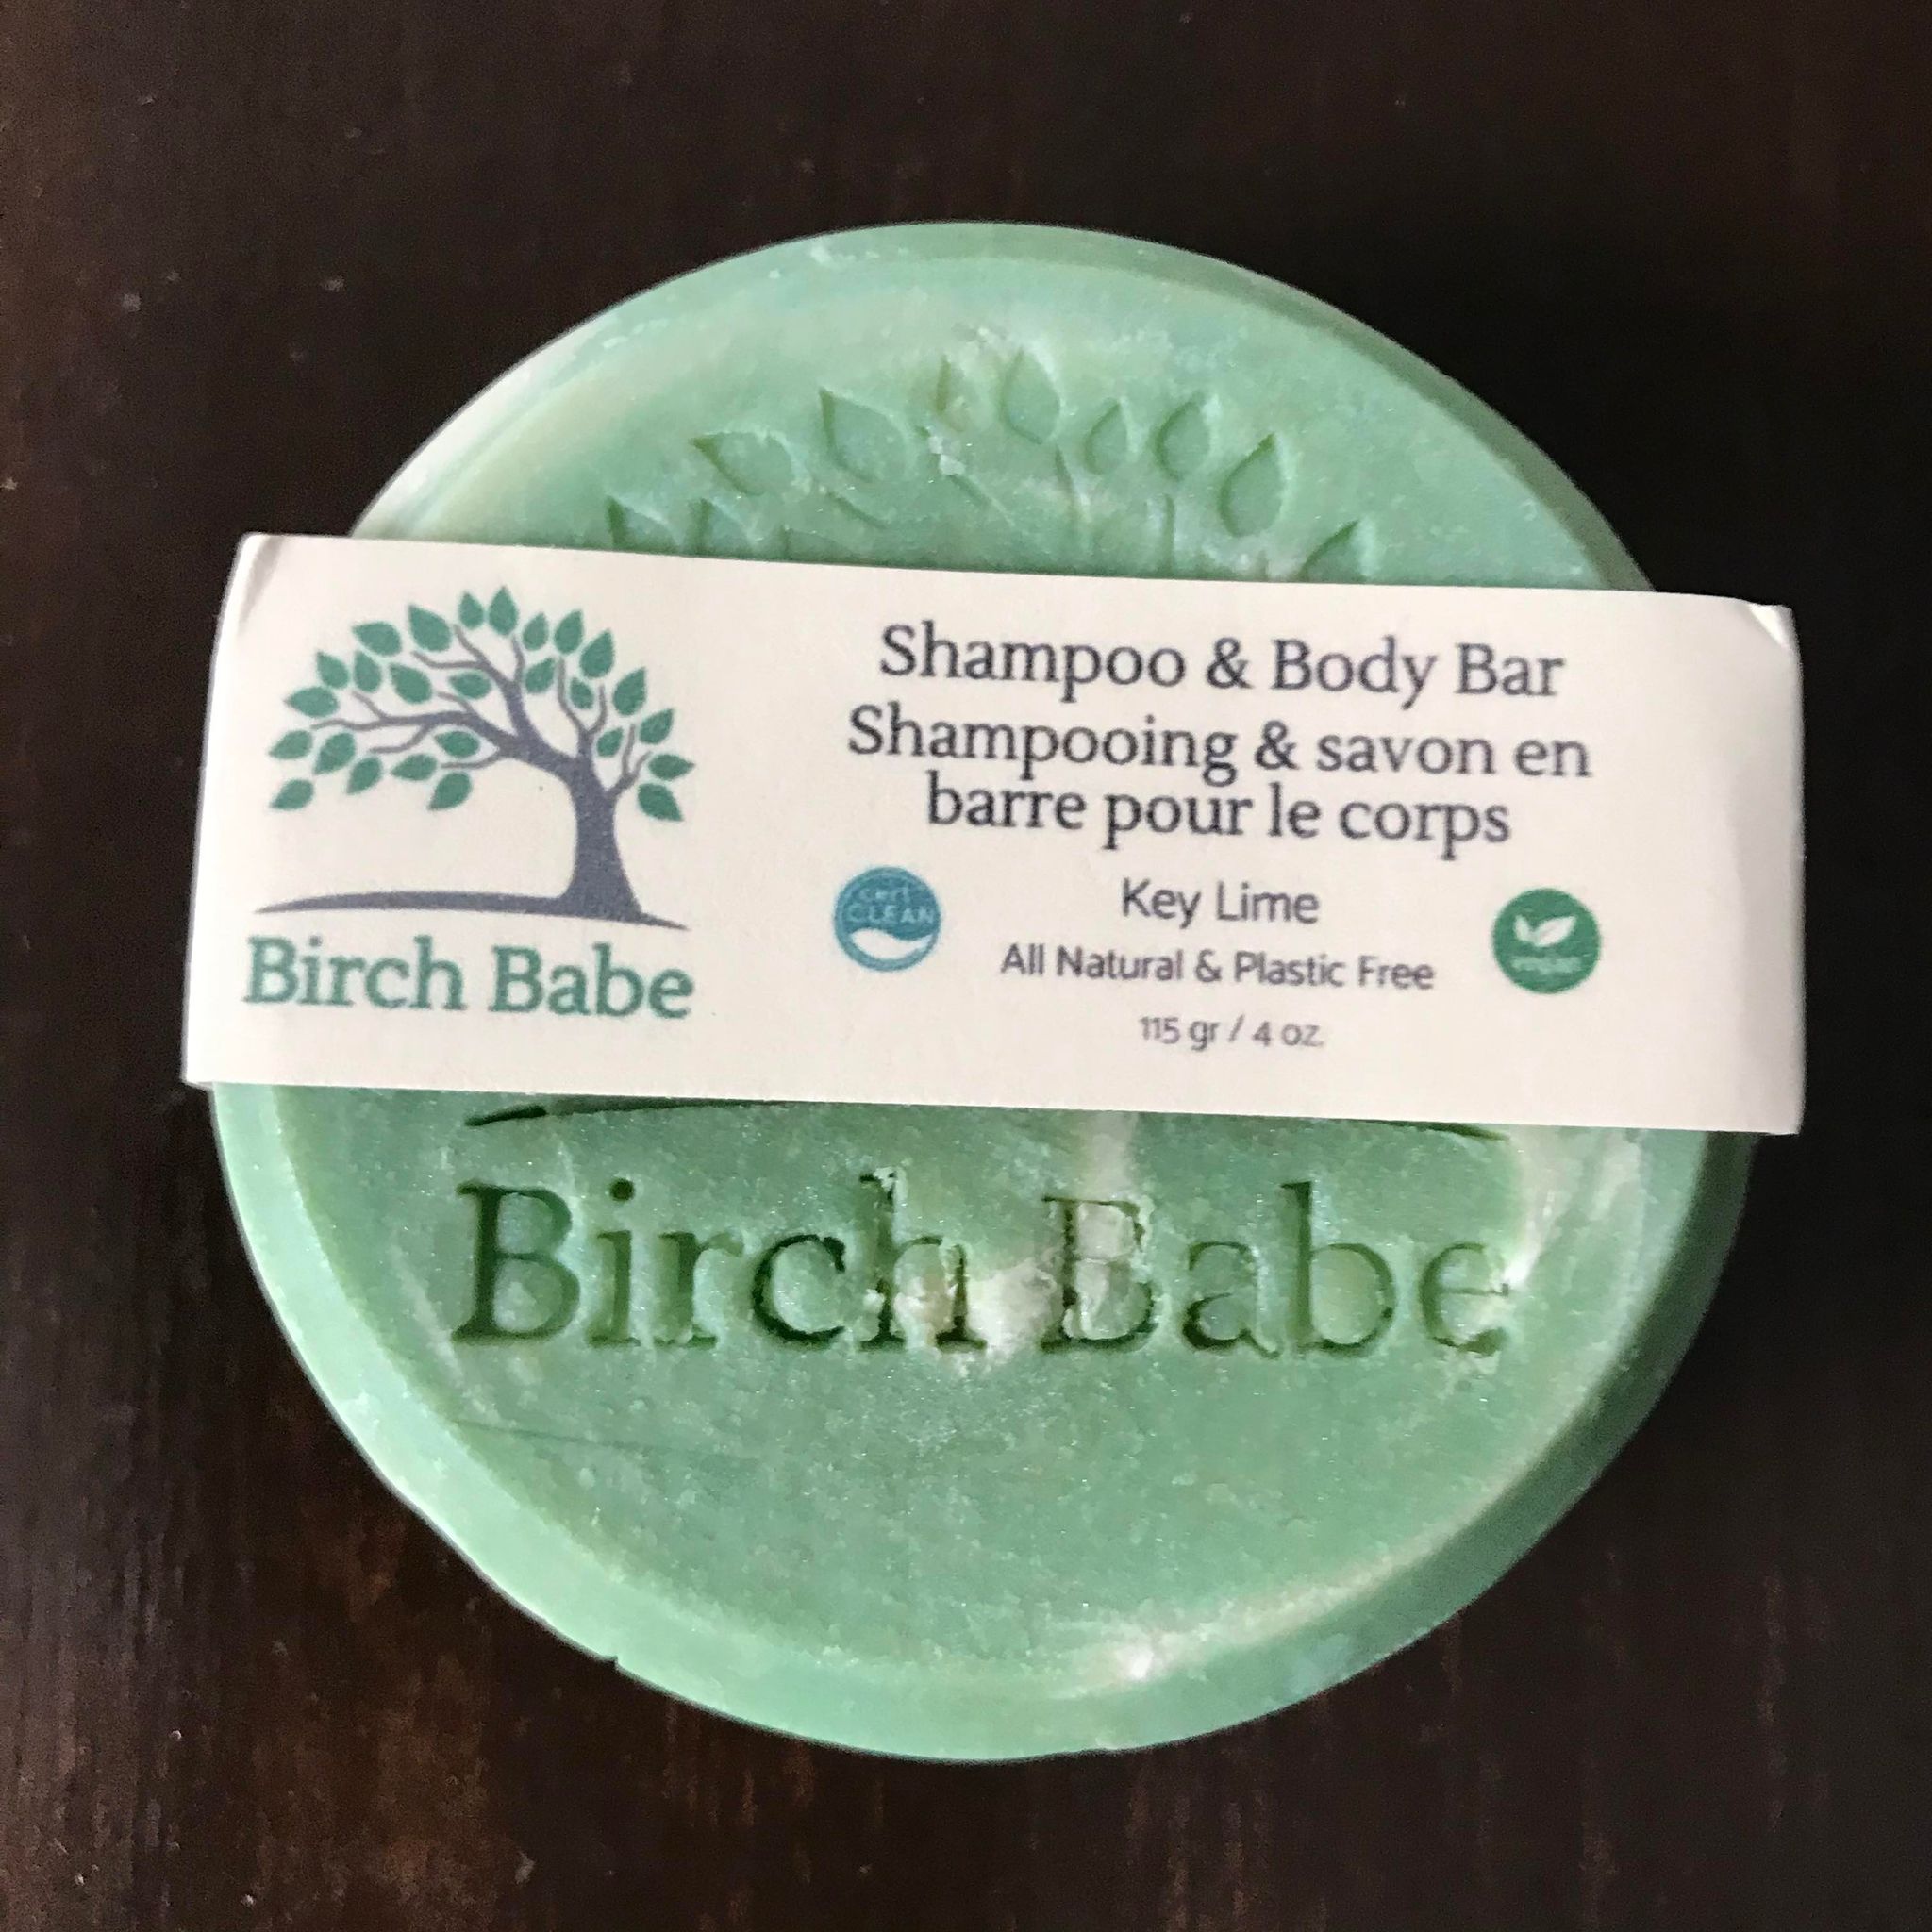 Birch Babe key lime 4 oz shampoo and body bar features essential oils which help purify the skin and hair while also supporting a healthy immune system. Tea Tree Oil is calming on the scalp combined with infusion of citrus will leave your hair and skin feeling and smelling fresh!